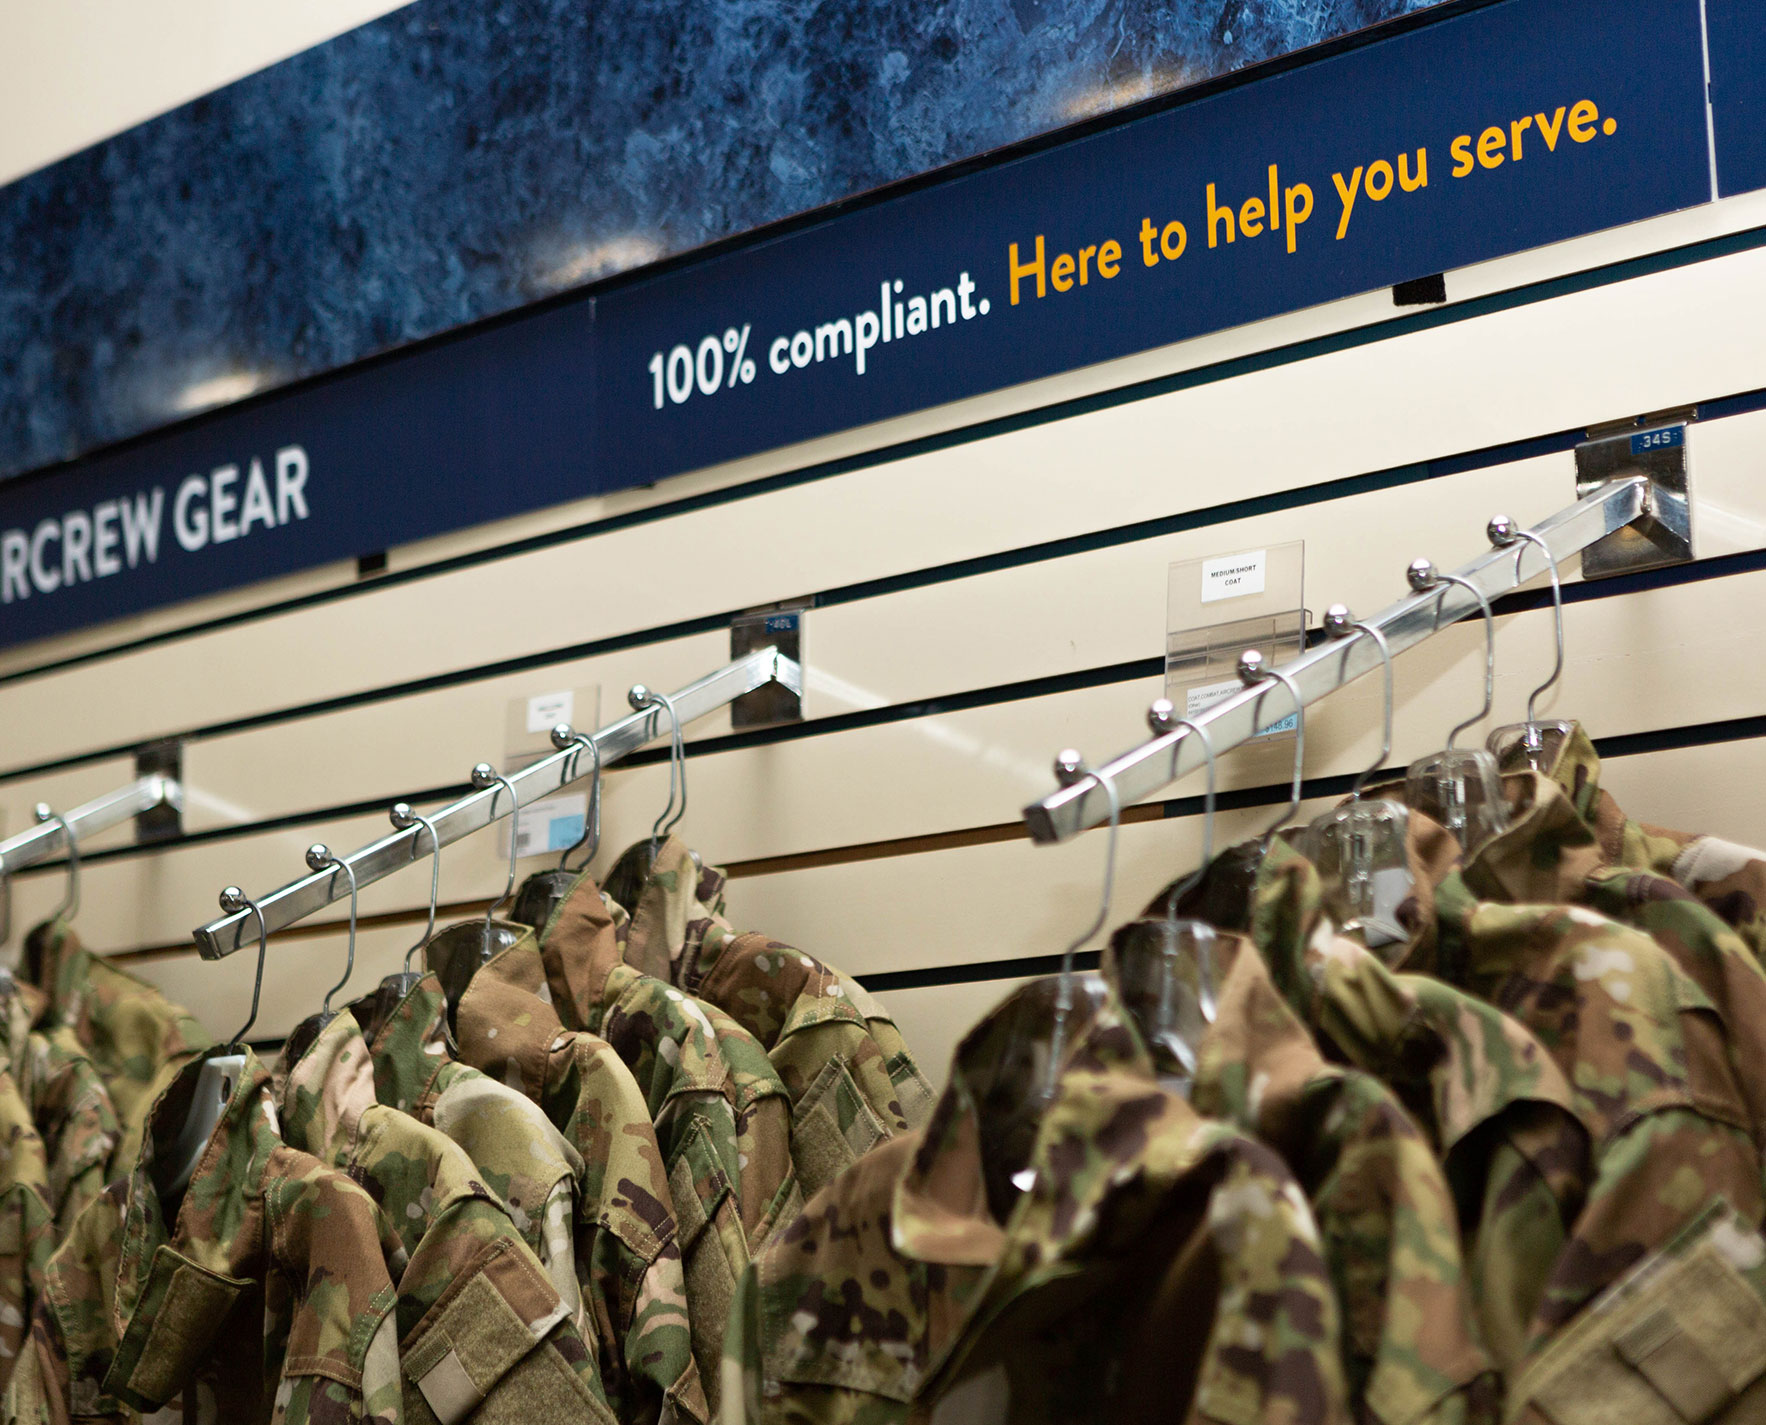 military jackets hanging on racks in a store